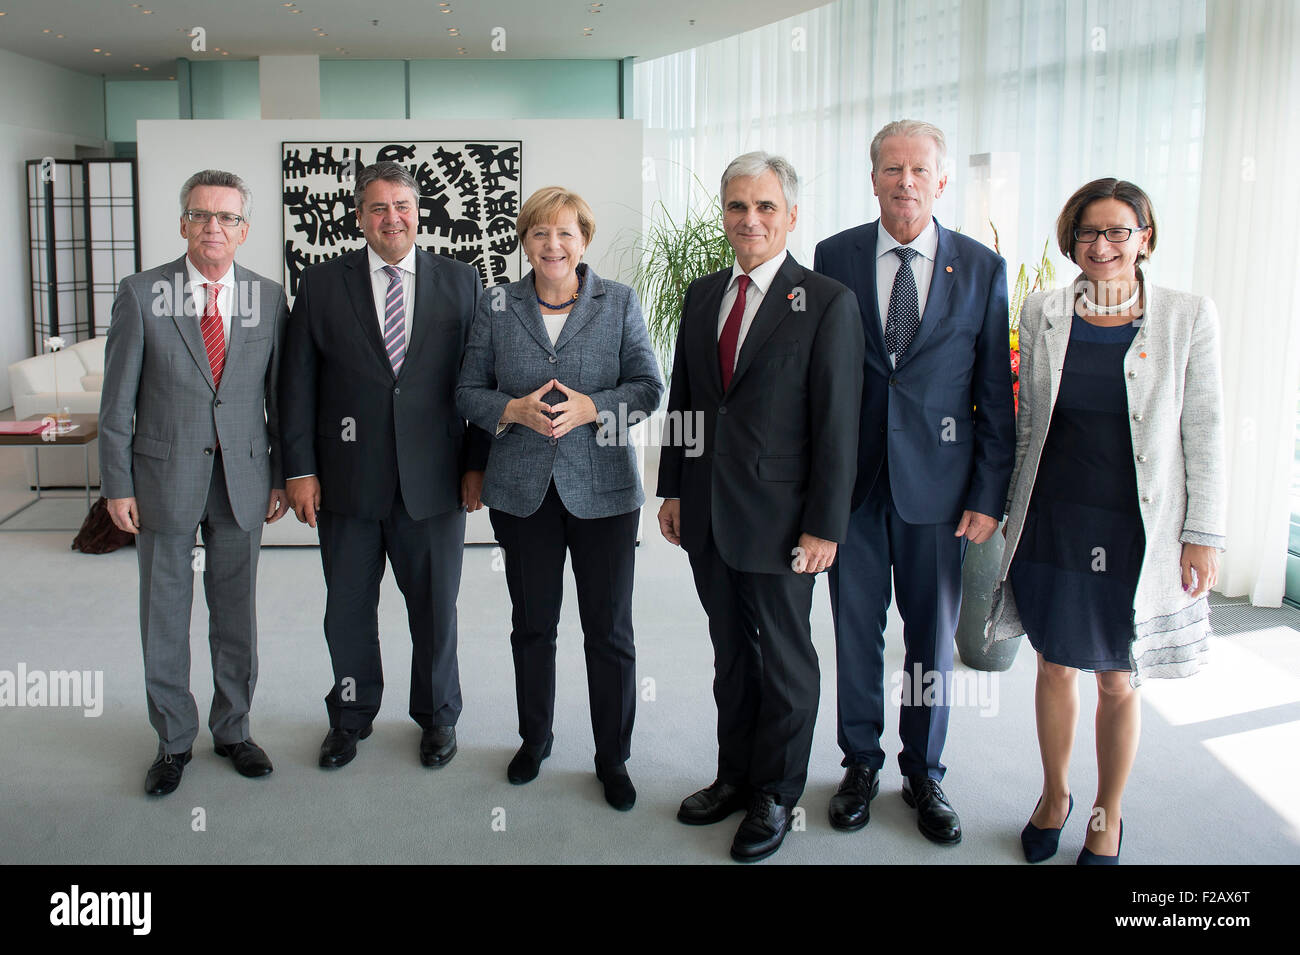 HANDOUT - A handout picture made available by the German Federal Press Office (Bundespresseamt), shows German Chancellor Angela Merkel (CDU - third from left) and Austrian Chancellor Werner Faymann (SPOE fourth from left), at the beginning of a meeting with both countries's ministers: Thomas de Maiziere (Germany, Interior, l), Sigmar Gabriel (Germany, Economy, second from left), Reinhold Mitterlehner (Austri, Economy, fifth from left) and Johanna Miki-Leitner (Austria - Interior, r) at the German Federal Chancellery in Berlin, Germany, 15 September 2015. PHOTO: BUNDESREGIERUNG/GUIDO BERGMANN/D Stock Photo